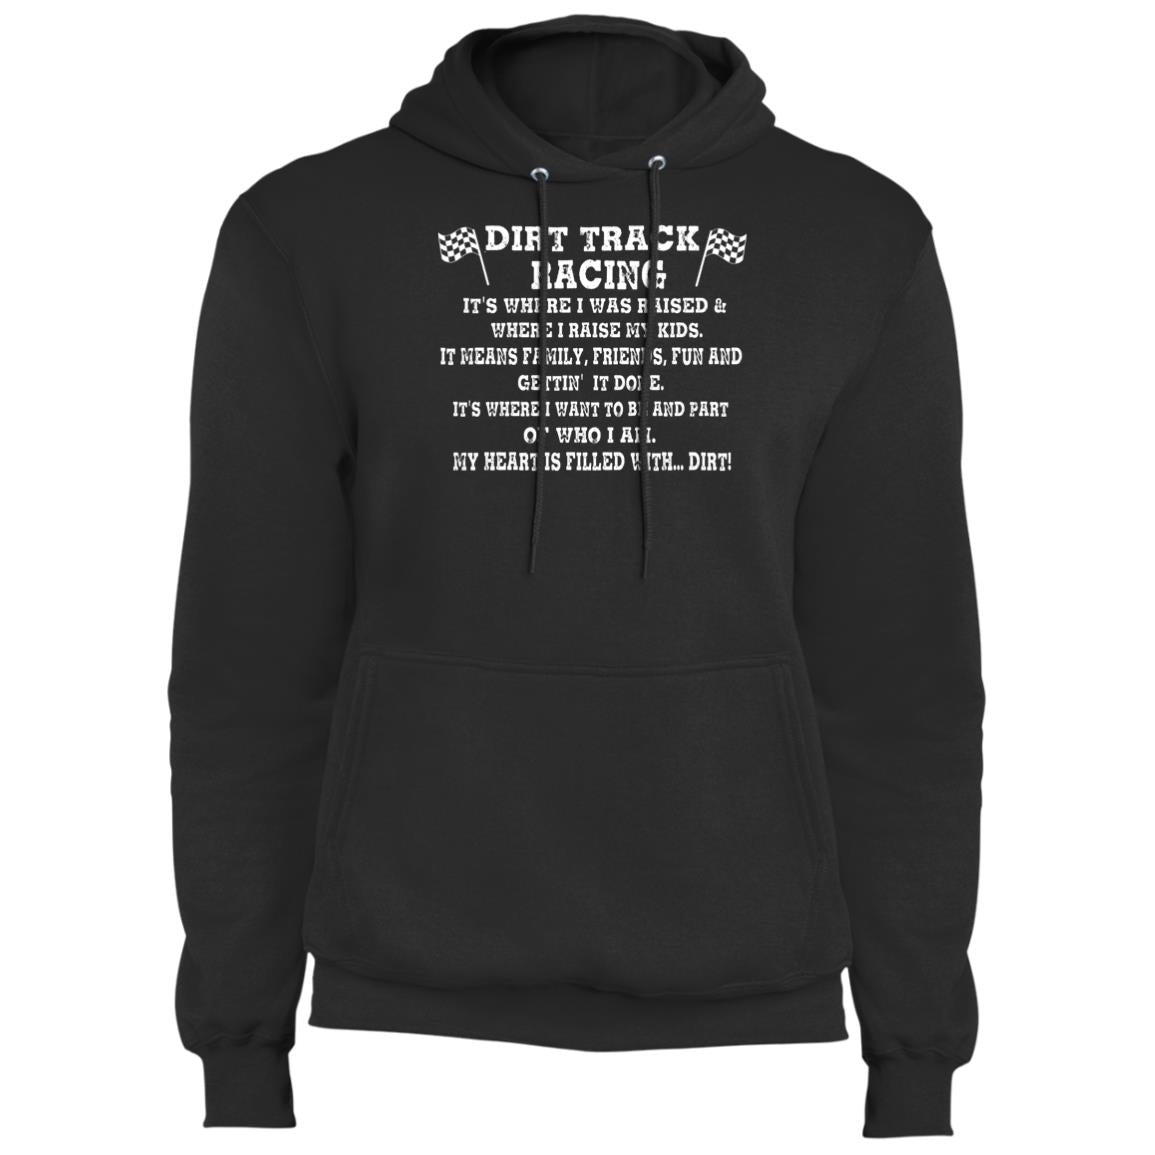 Dirt Track Racing It's Where I Was Raised Core Fleece Pullover Hoodie